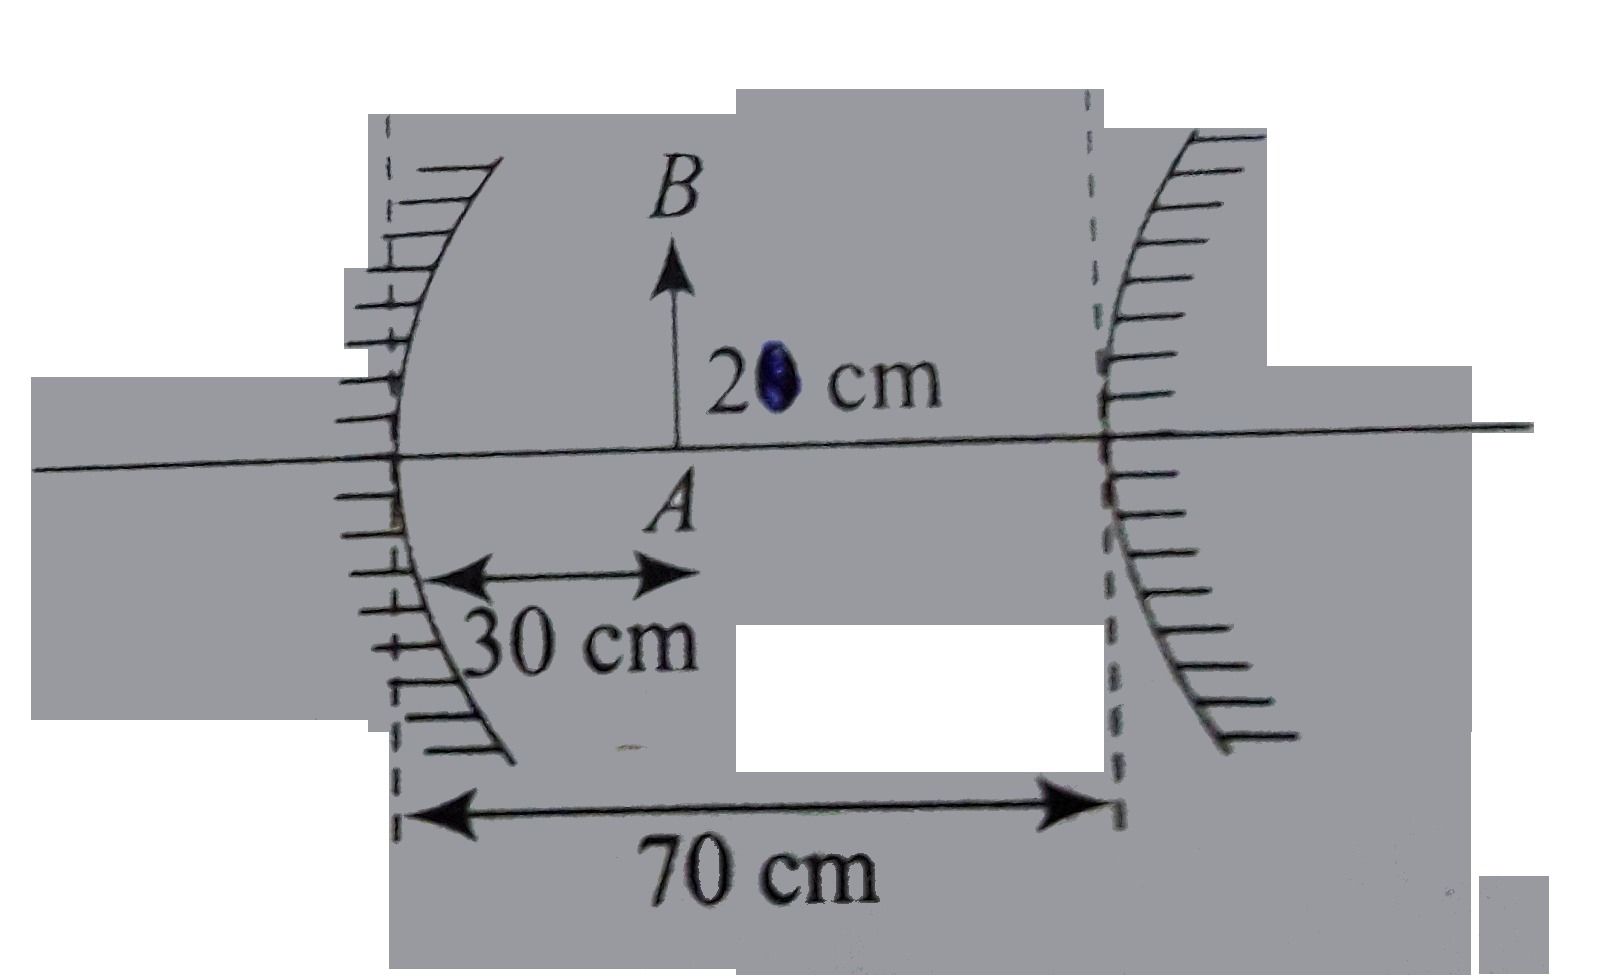 Convex Mirror Ray Diagram A Concave Mirror And A Convex Mirror Of Focal Lengths 10cm And 15cm